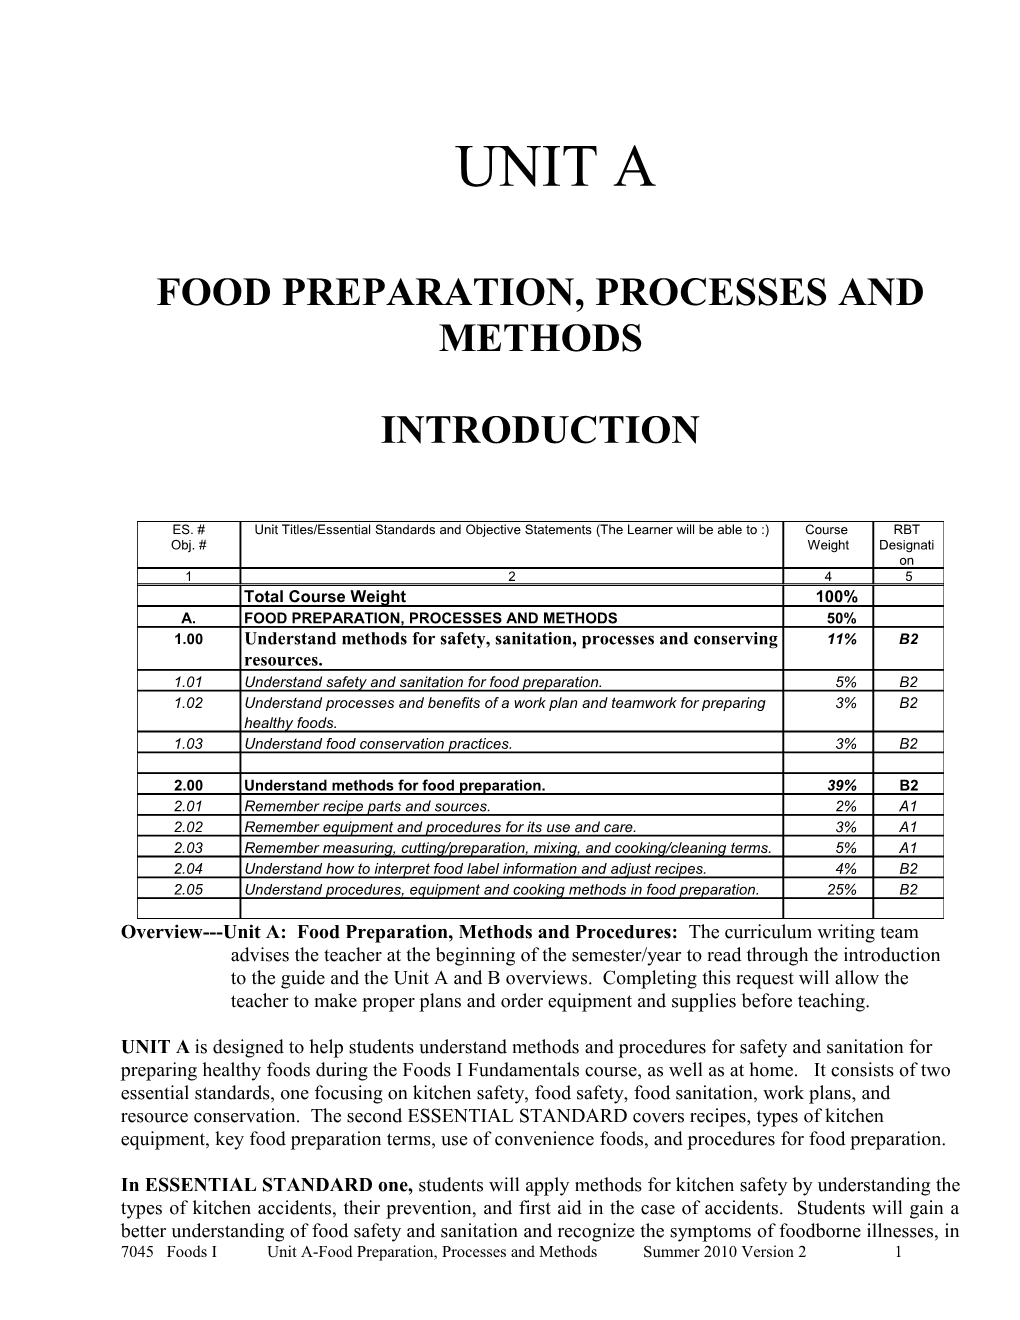 Food Preparation, Processes and Methods